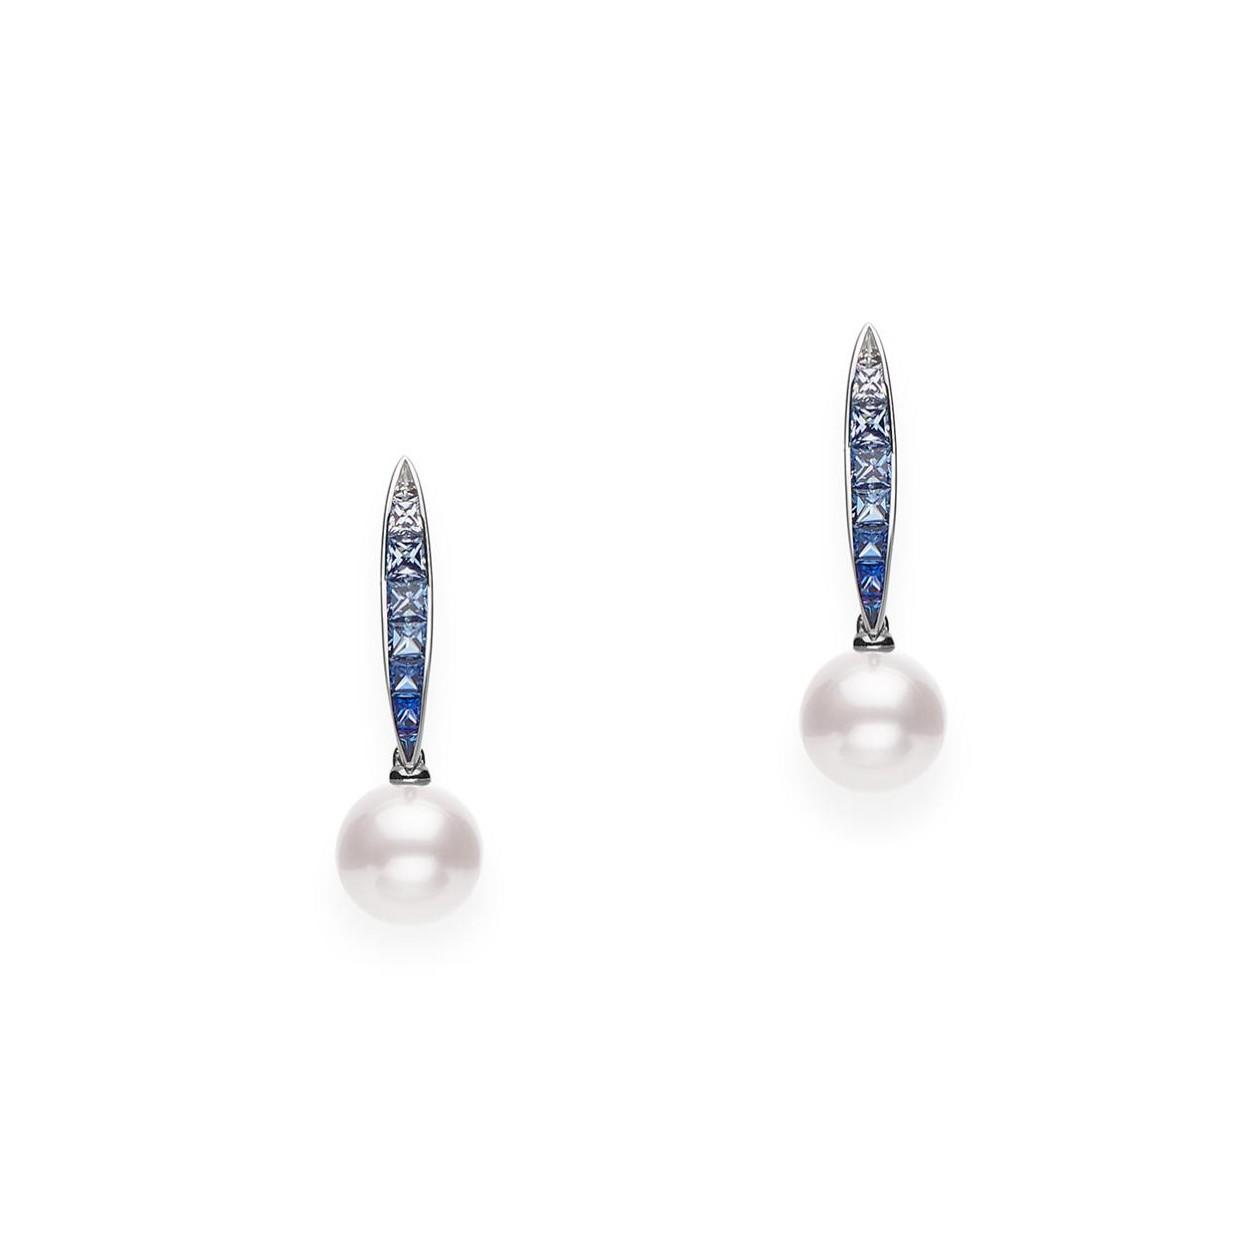 Mikimoto Ocean Collection Sapphire and Pearl Earrings 0